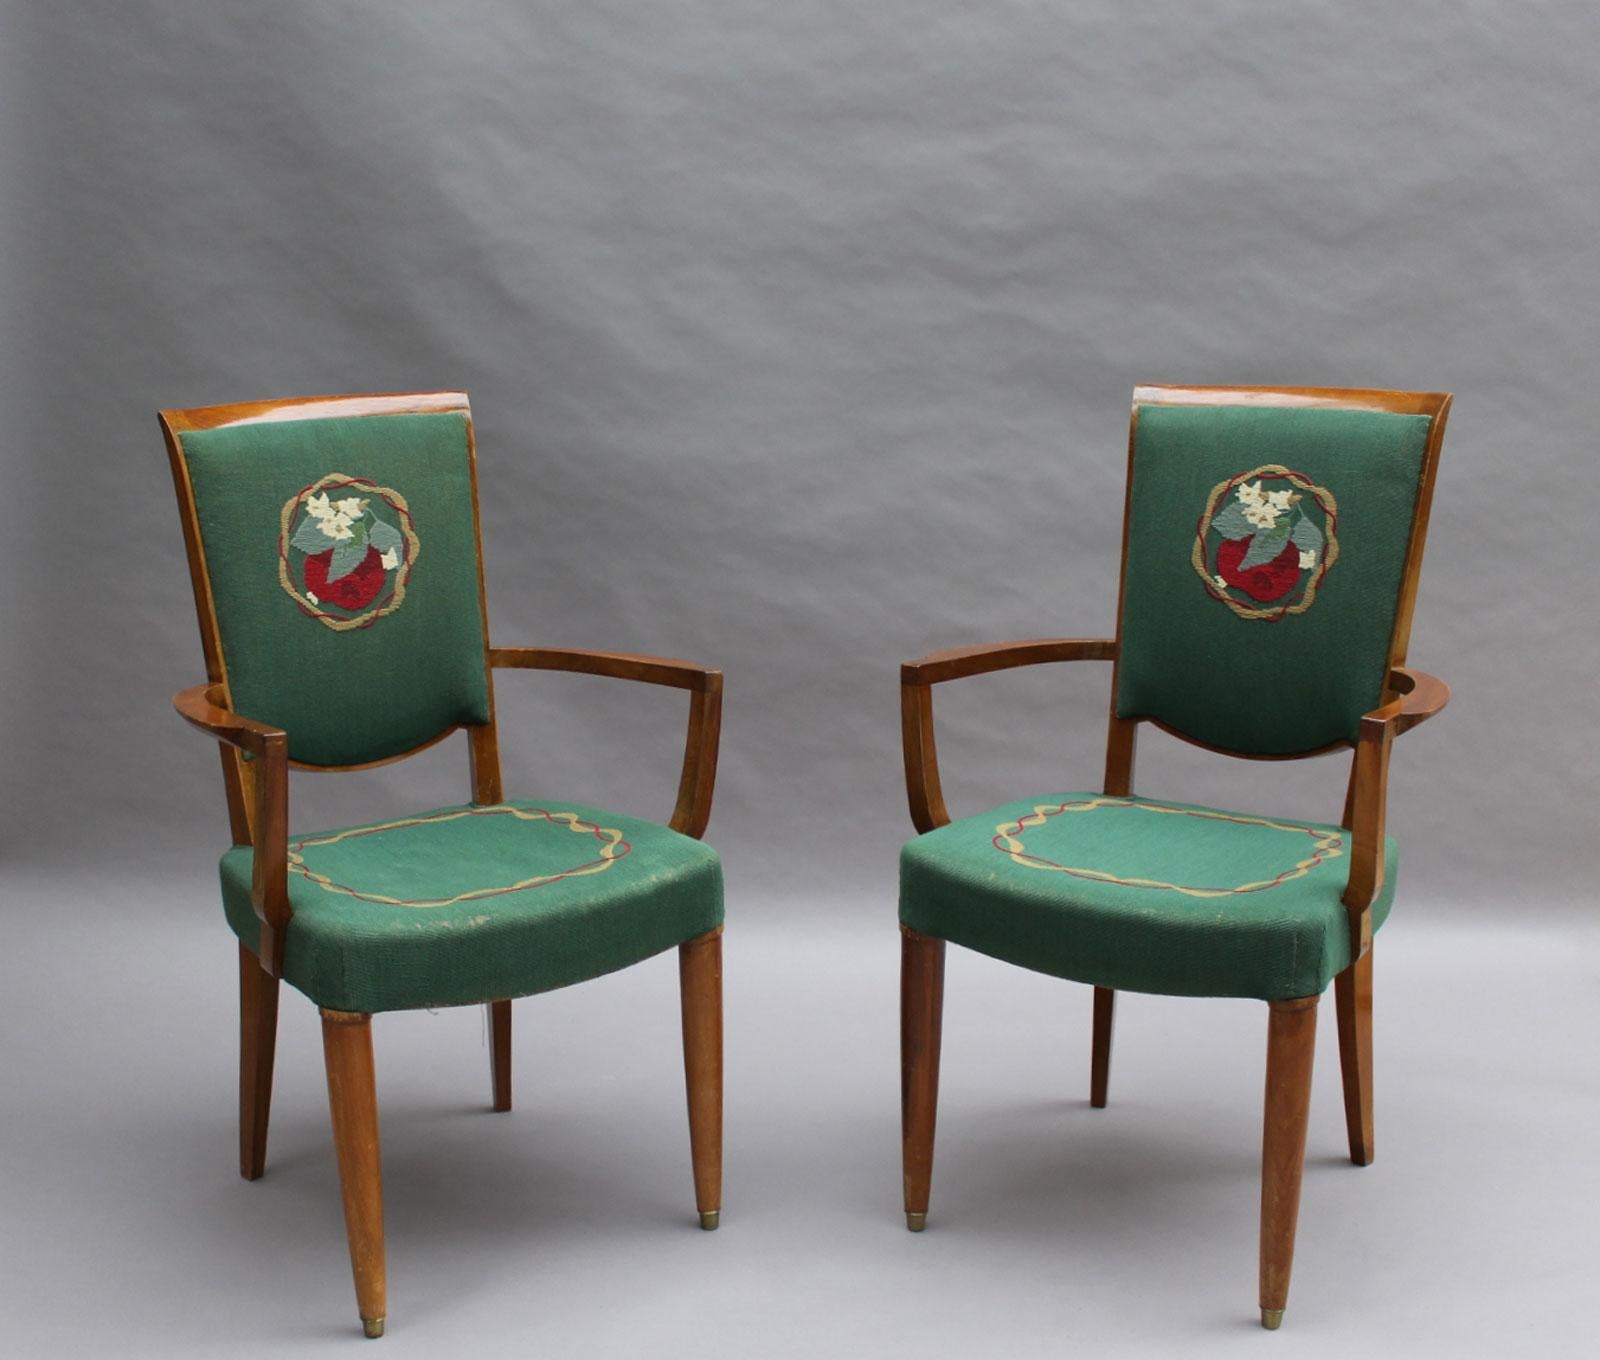 Four fine French Art Deco walnut bridge arm chairs by Jules Leleu.
Original Aubusson tapestry, as shown in 